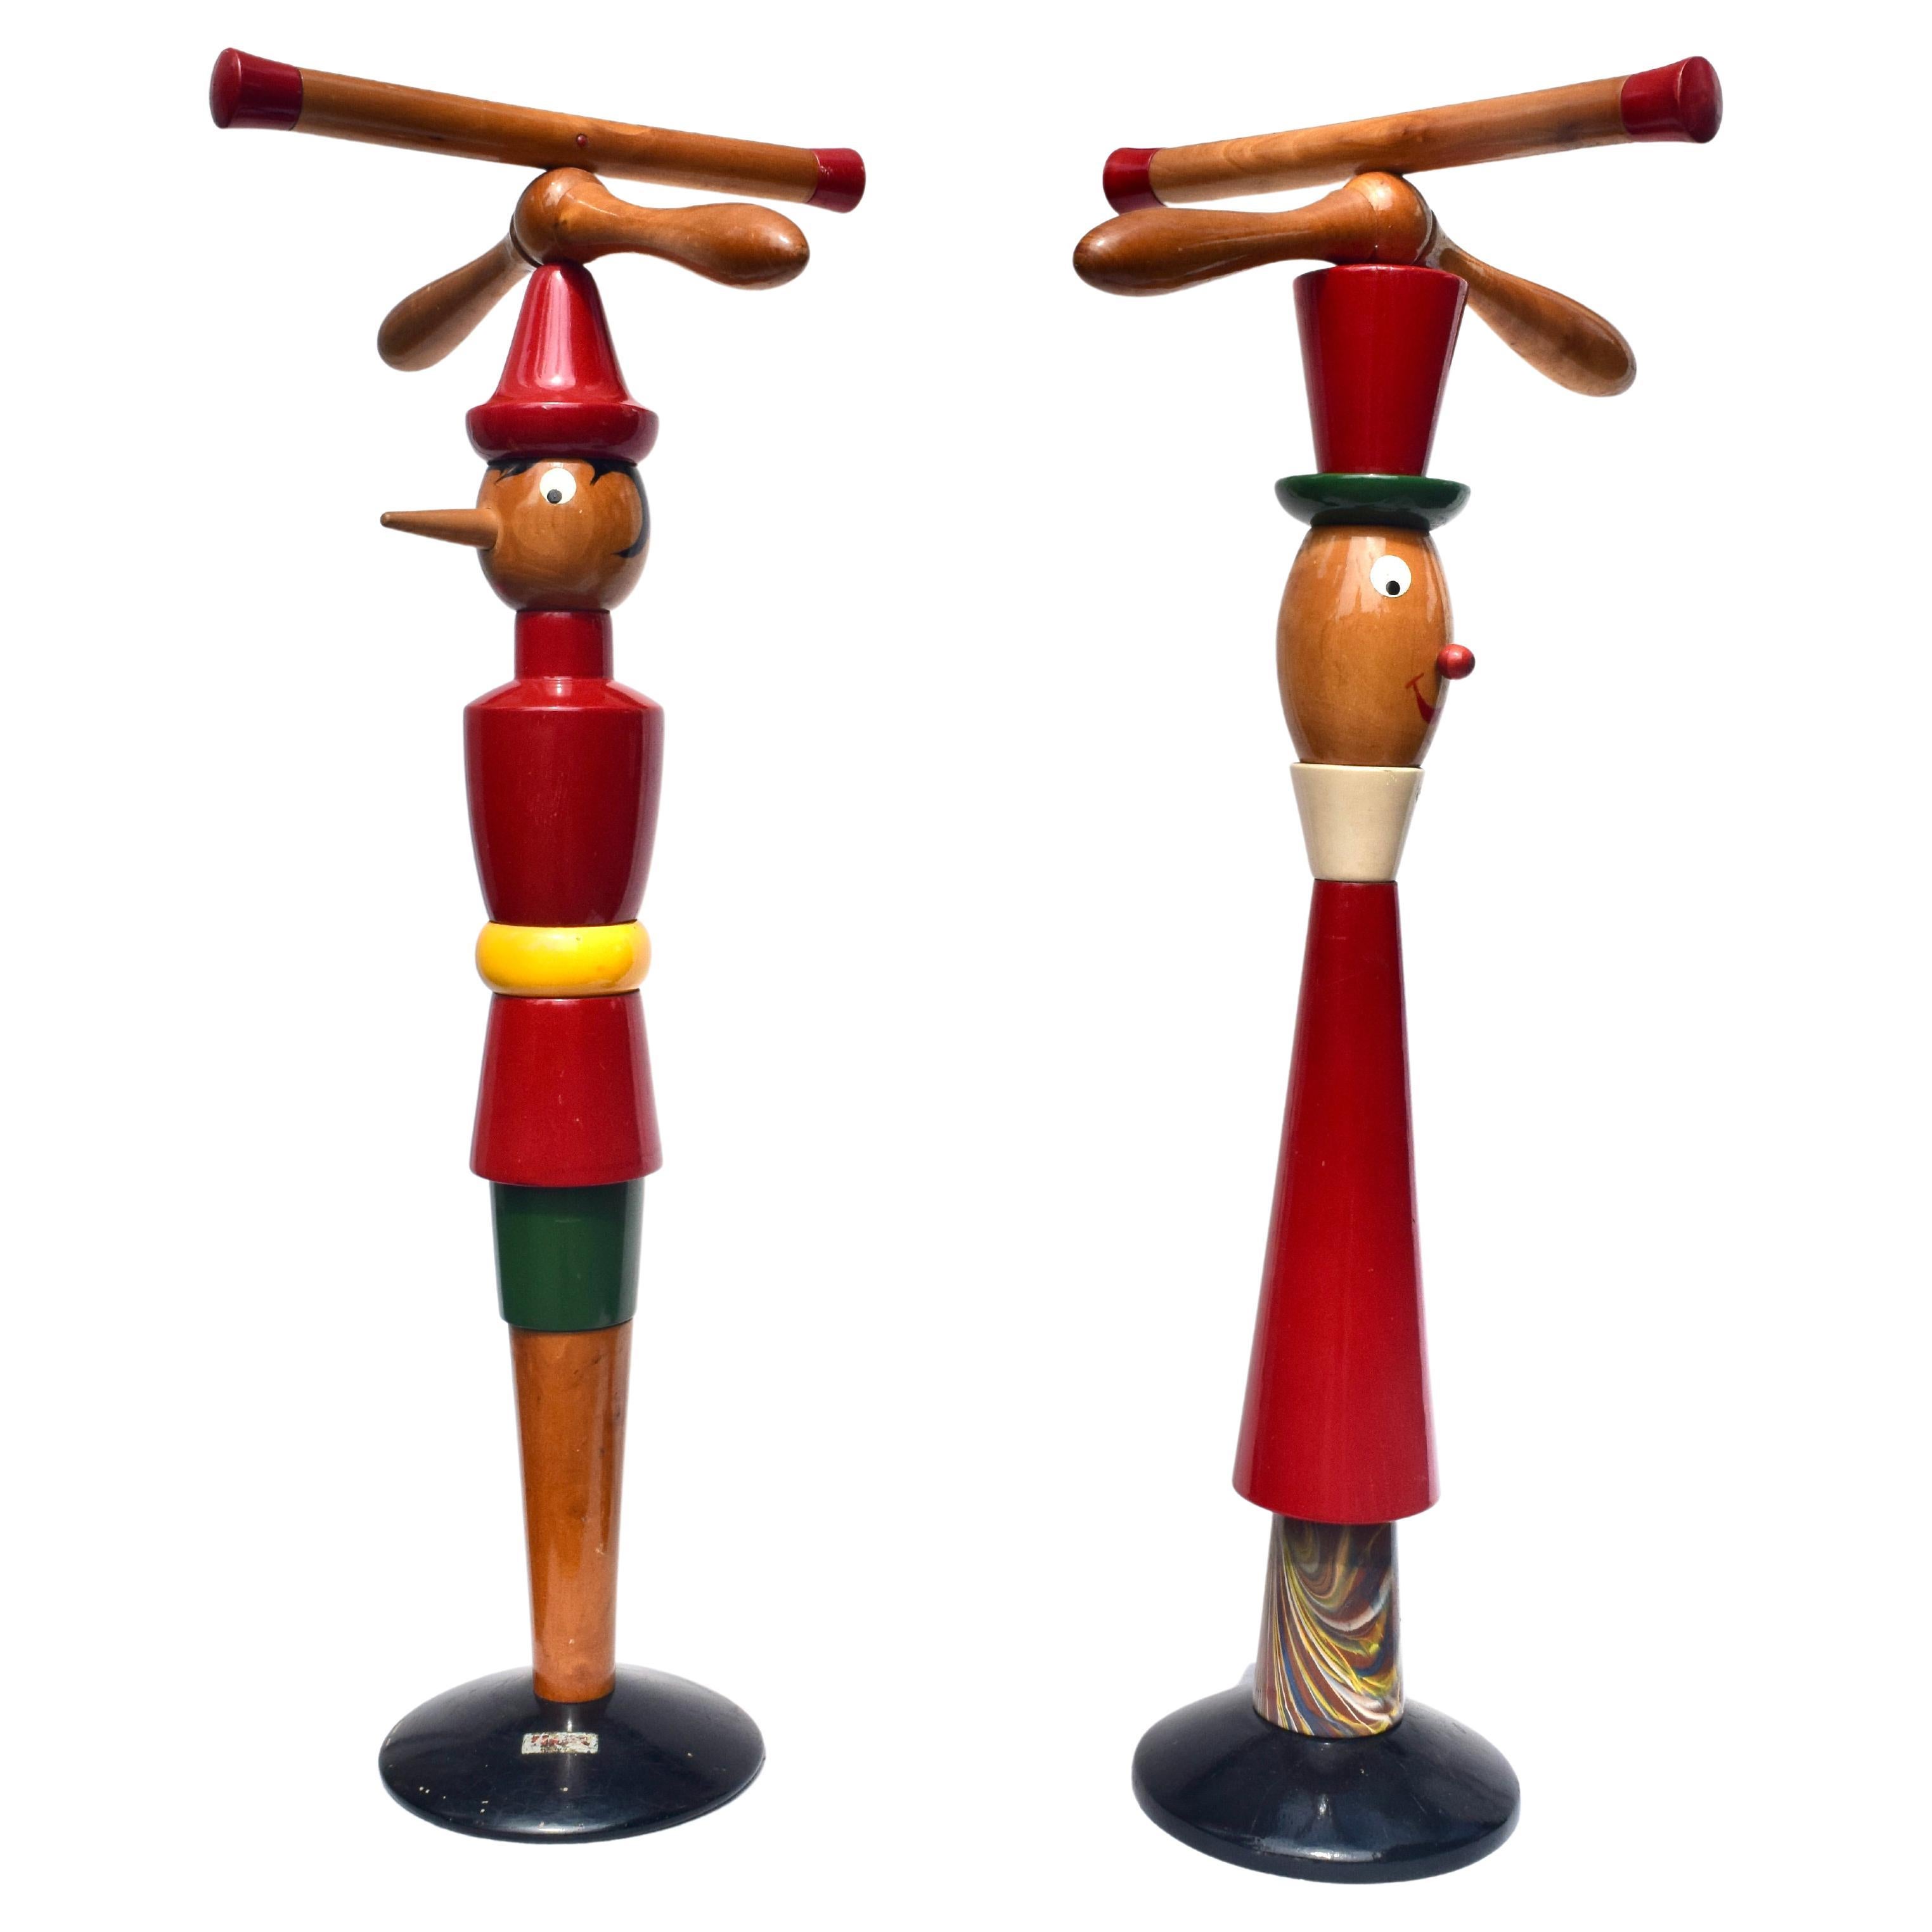 Valet Stands Pinocchio & Jiminy Cricket, 1940s Italian Design For Sale